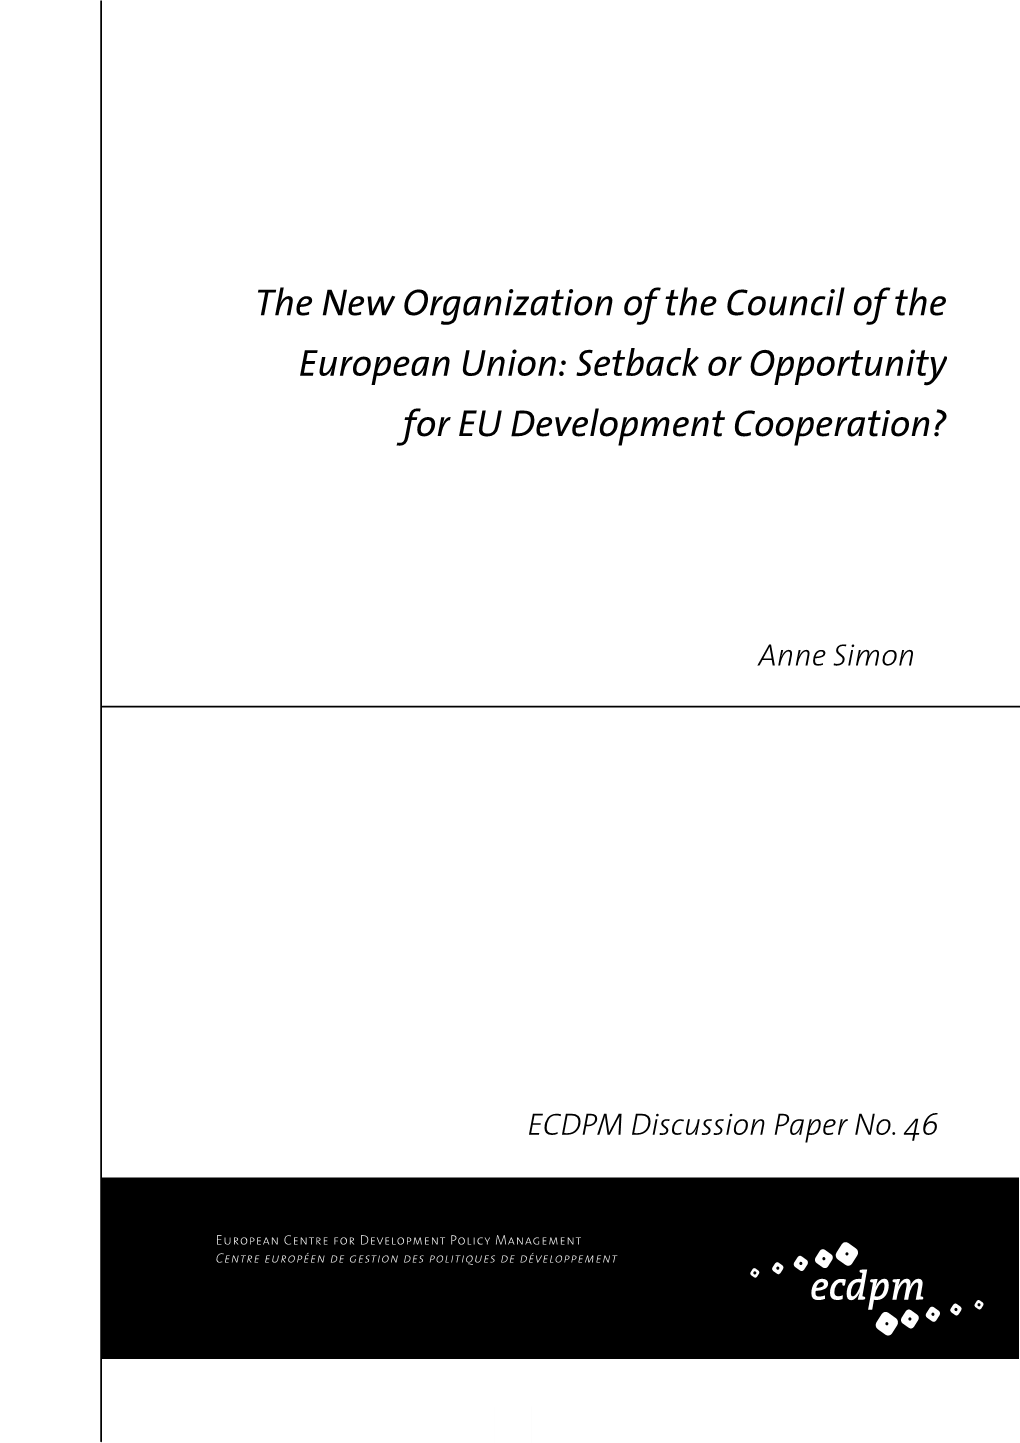 The New Organization of the Council of the European Union: Setback Or Opportunity for EU Development Cooperation?